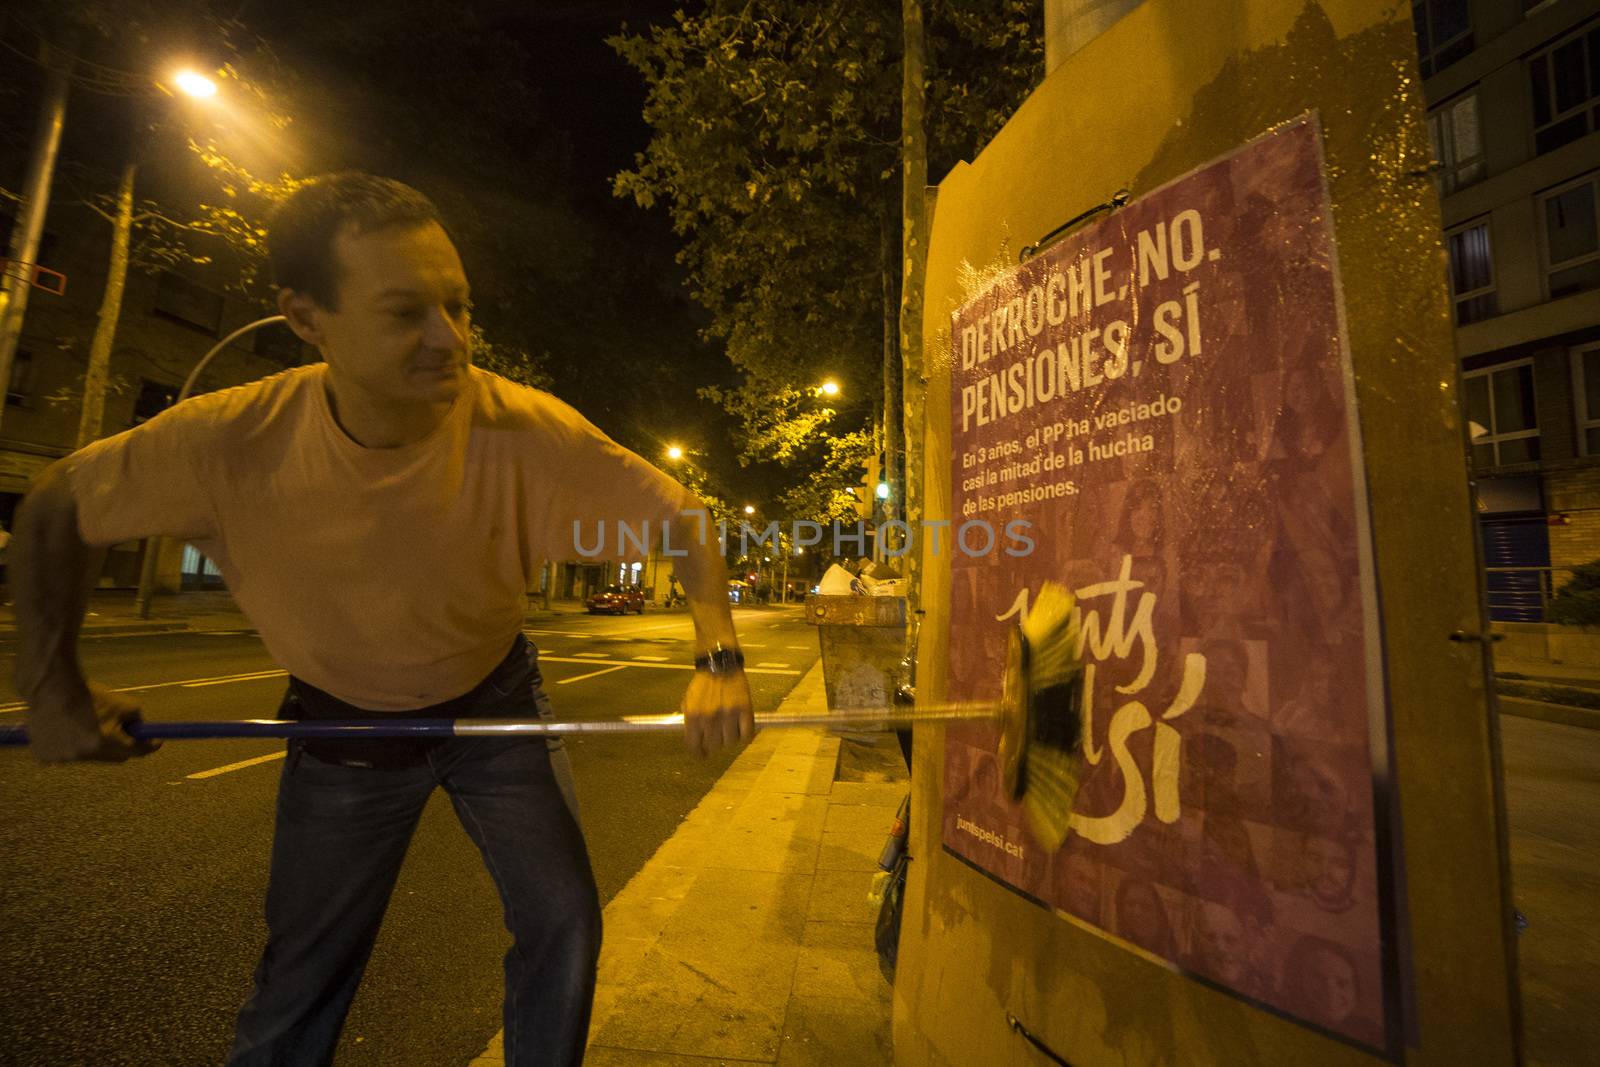 SPAIN, Barcelona: An activist from the pro-independence coalition Junts pel Si (Together for Yes) sticks up posters around Barcelona on the evening of September 16, 2015. Pro-independence groups are rallying their supporters ahead of the Catalonian parliamentary election, taking place on September 27.